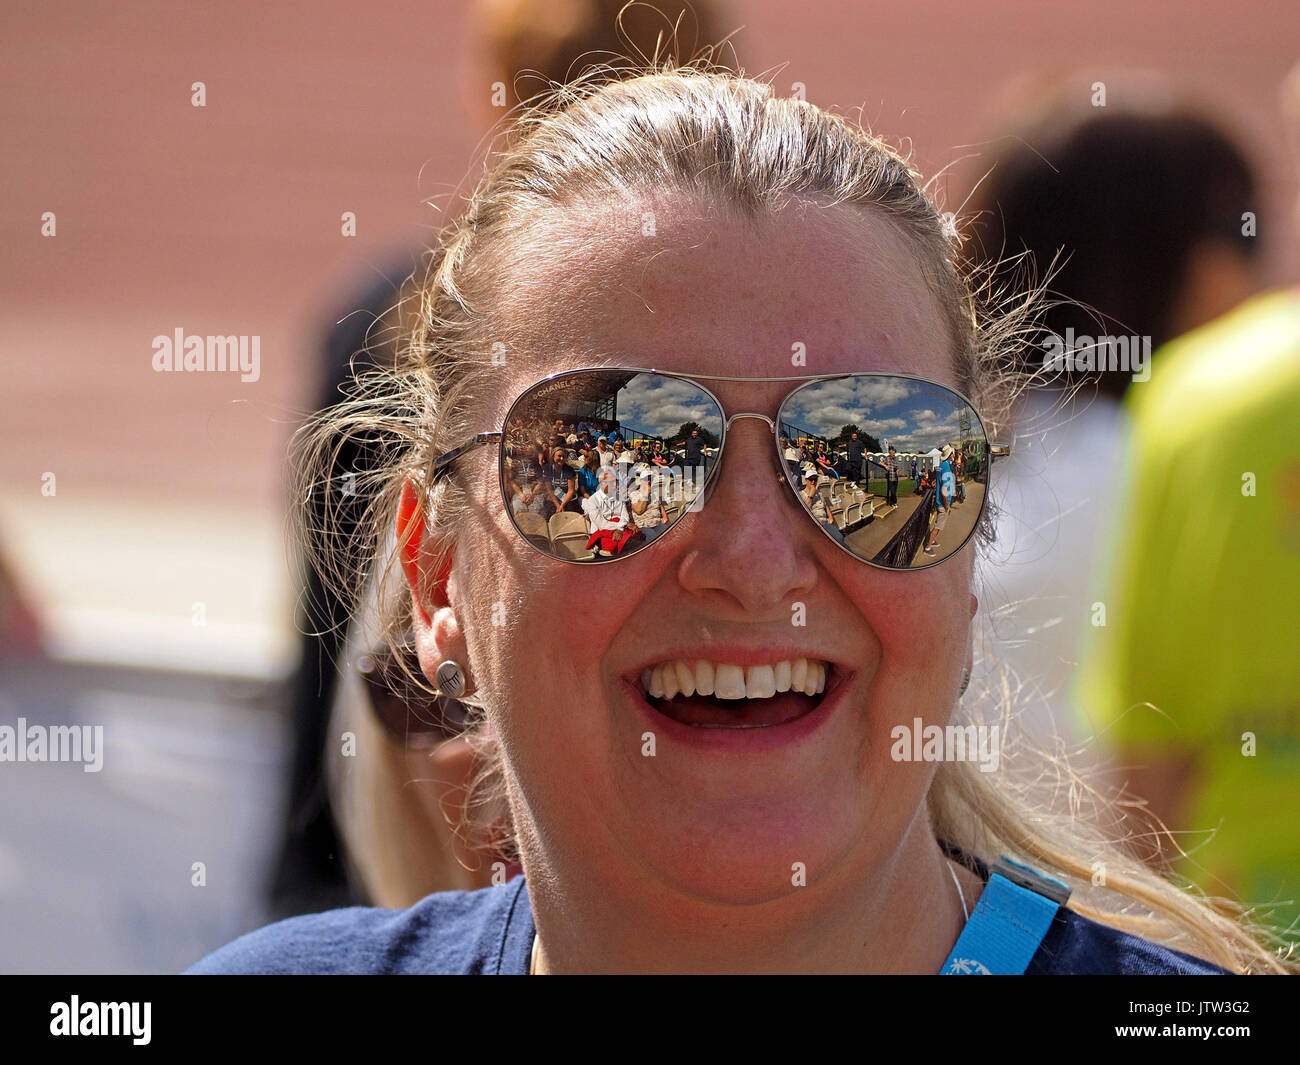 Sheffield, UK. 10th August, 2017. Spectators refelected in sunglasses of one supporter at Special Olympics National Games in Sheffield Credit: Steve Holroyd/Alamy Live News Stock Photo